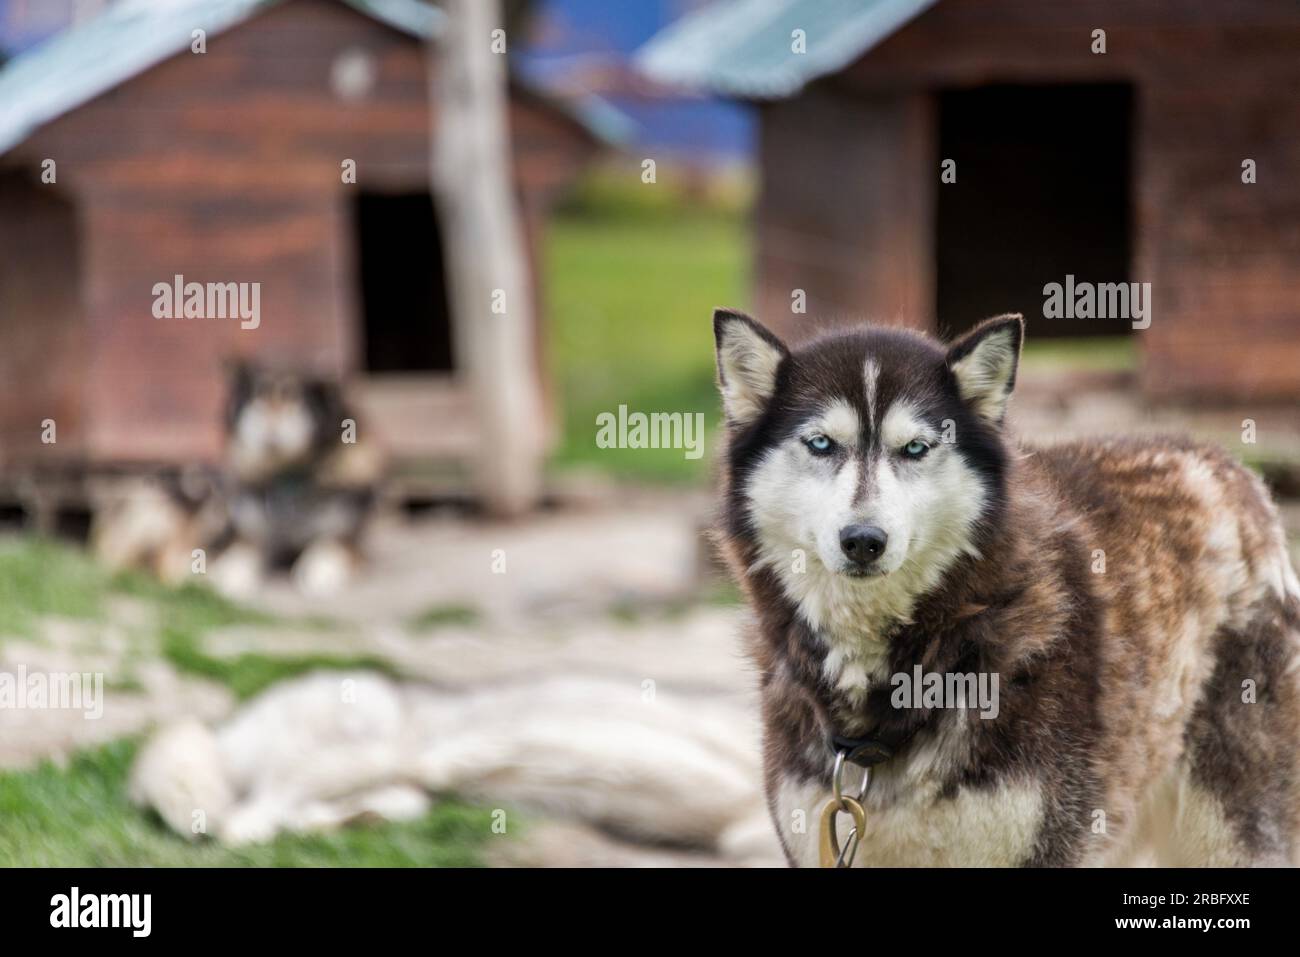 Shelter for dogs used in sledding, with a dog in the foreground, in Ushuaia, Argentina Stock Photo